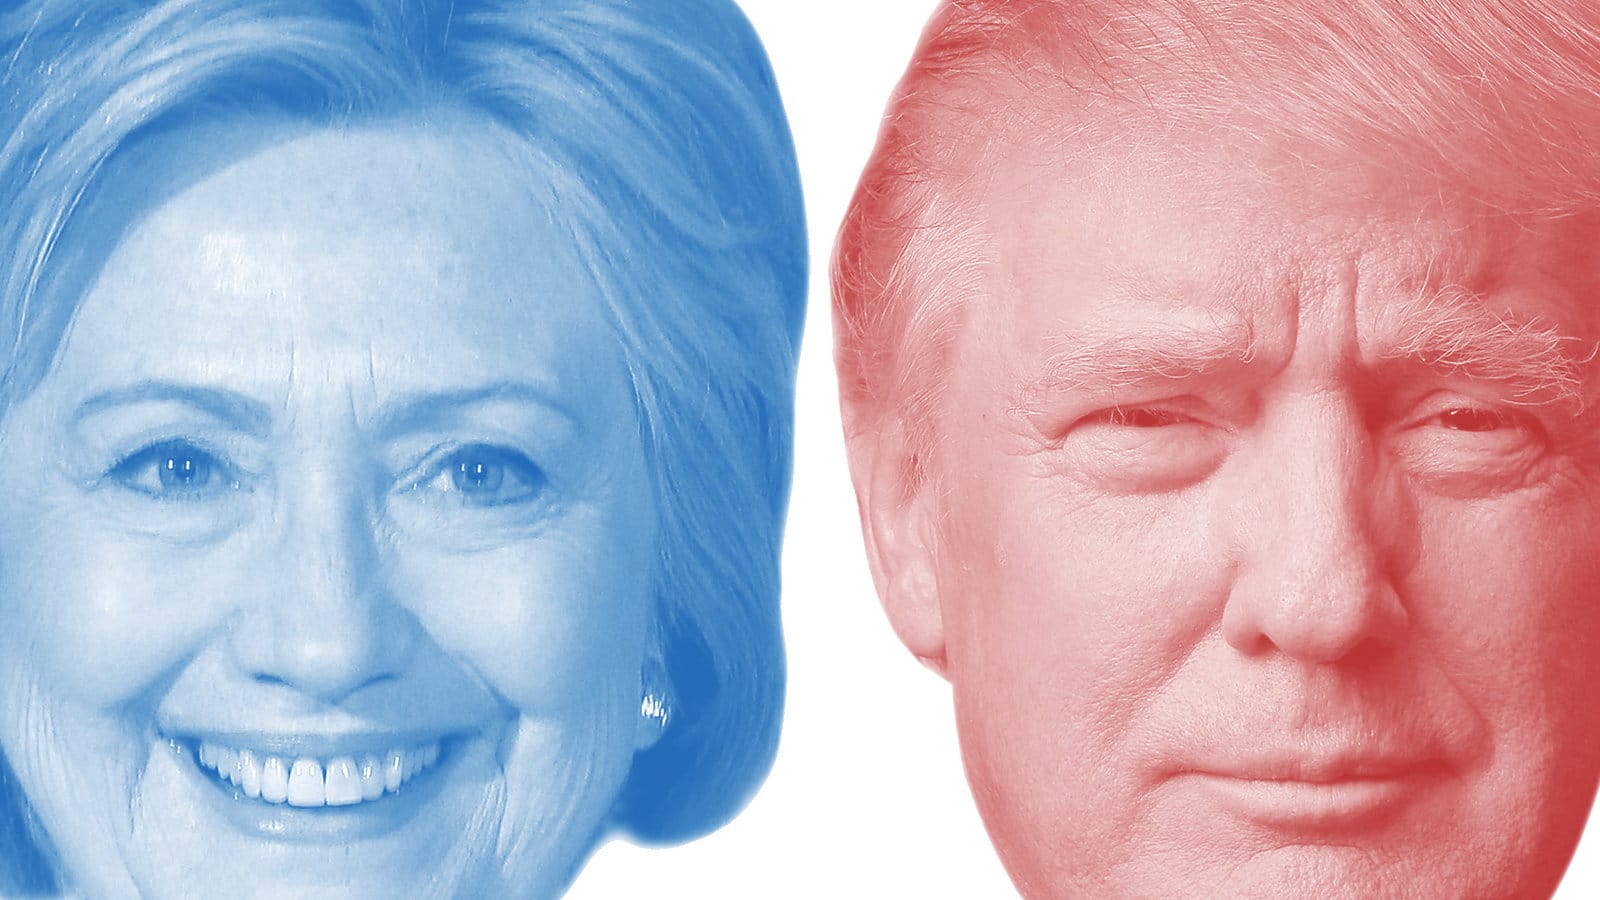 5 Findings From The Most Shared Videos Of The US Presidential Election